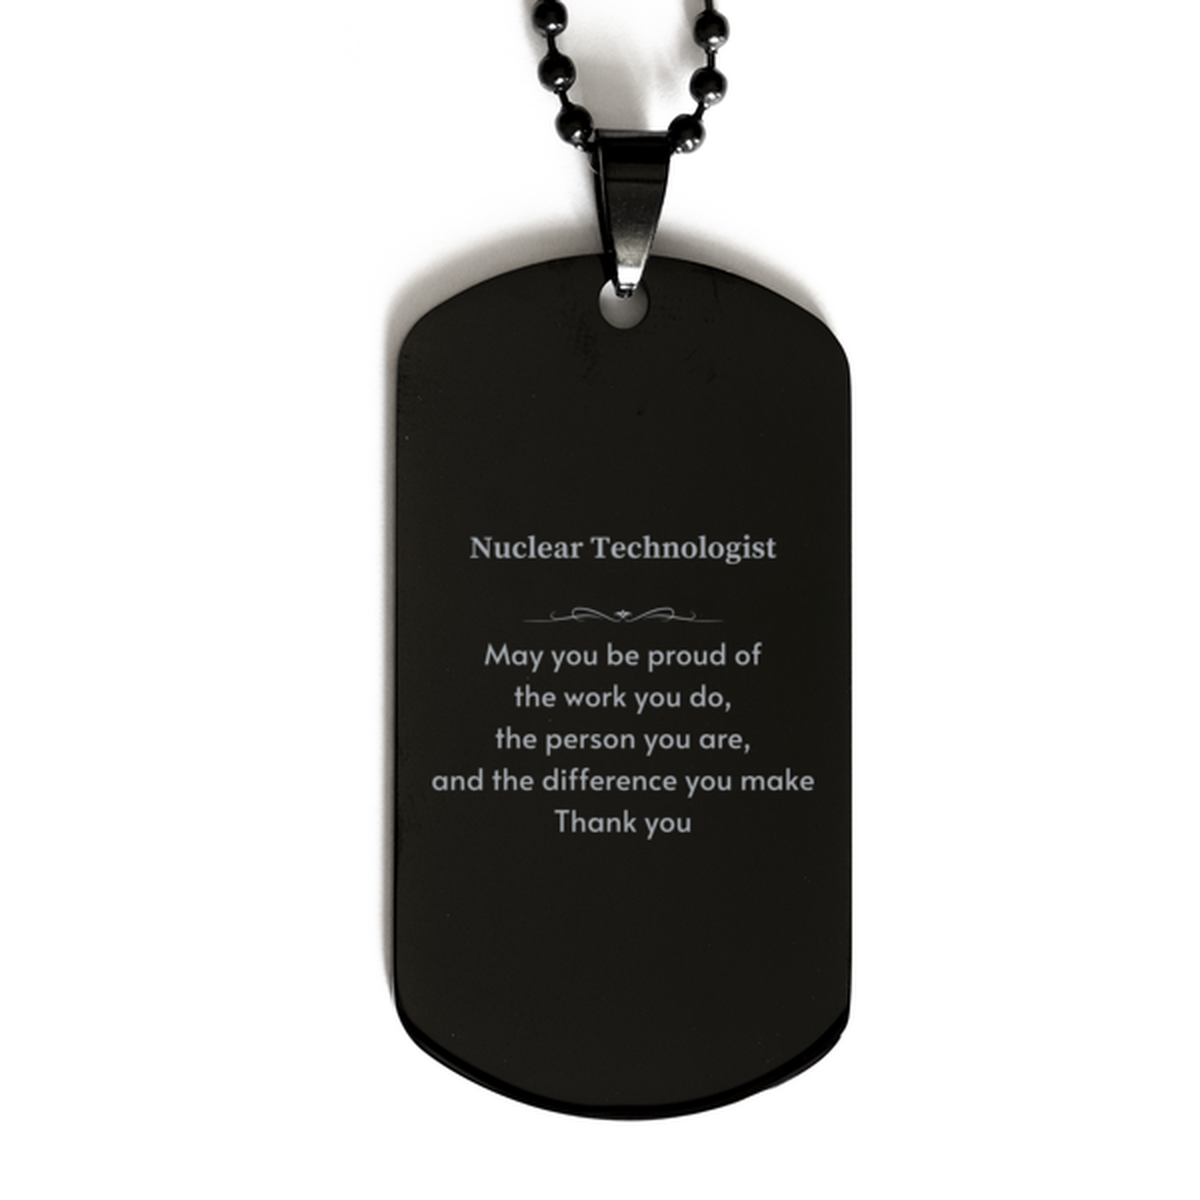 Heartwarming Black Dog Tag Retirement Coworkers Gifts for Nuclear Technologist, Nuclear Technologist May You be proud of the work you do, the person you are Gifts for Boss Men Women Friends